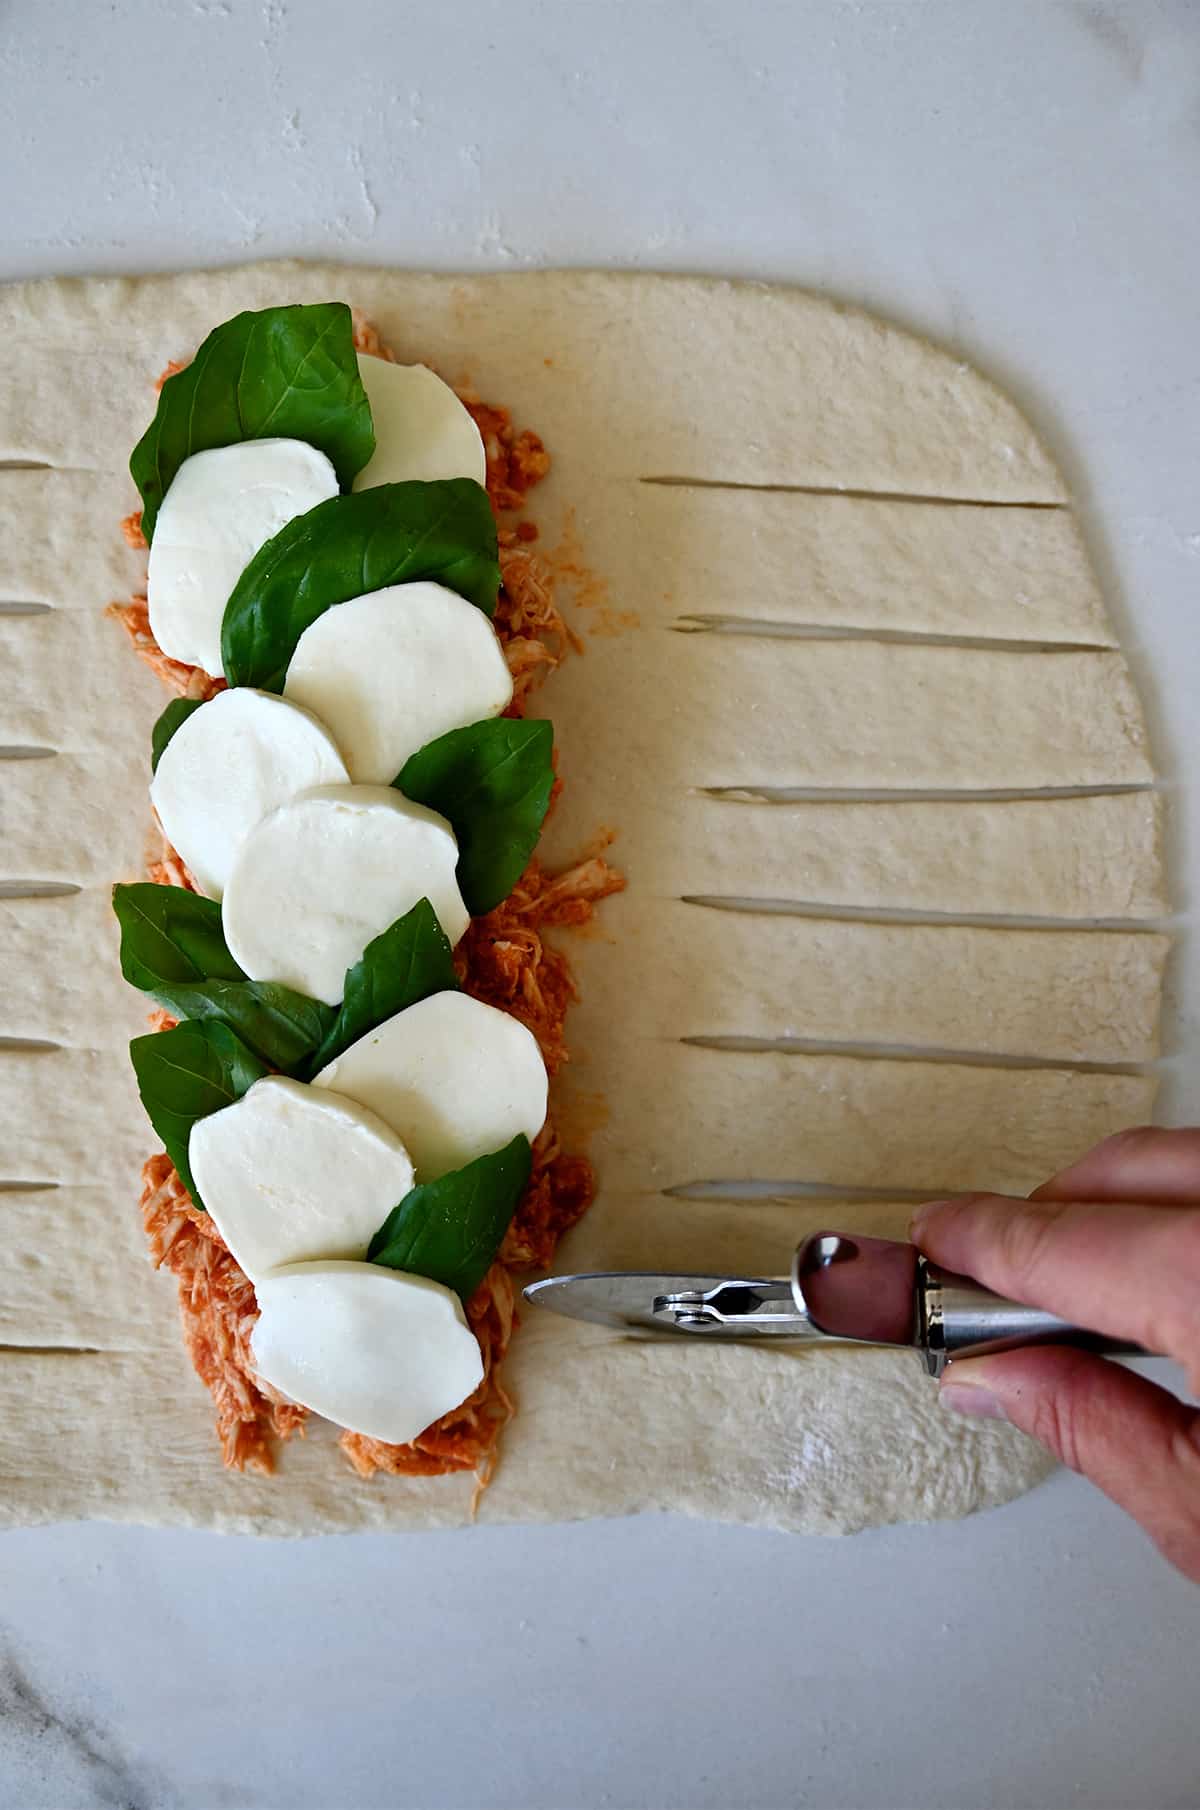 A hand holding a pizza wheel cuts slits into dough topped with Stromboli fillings.